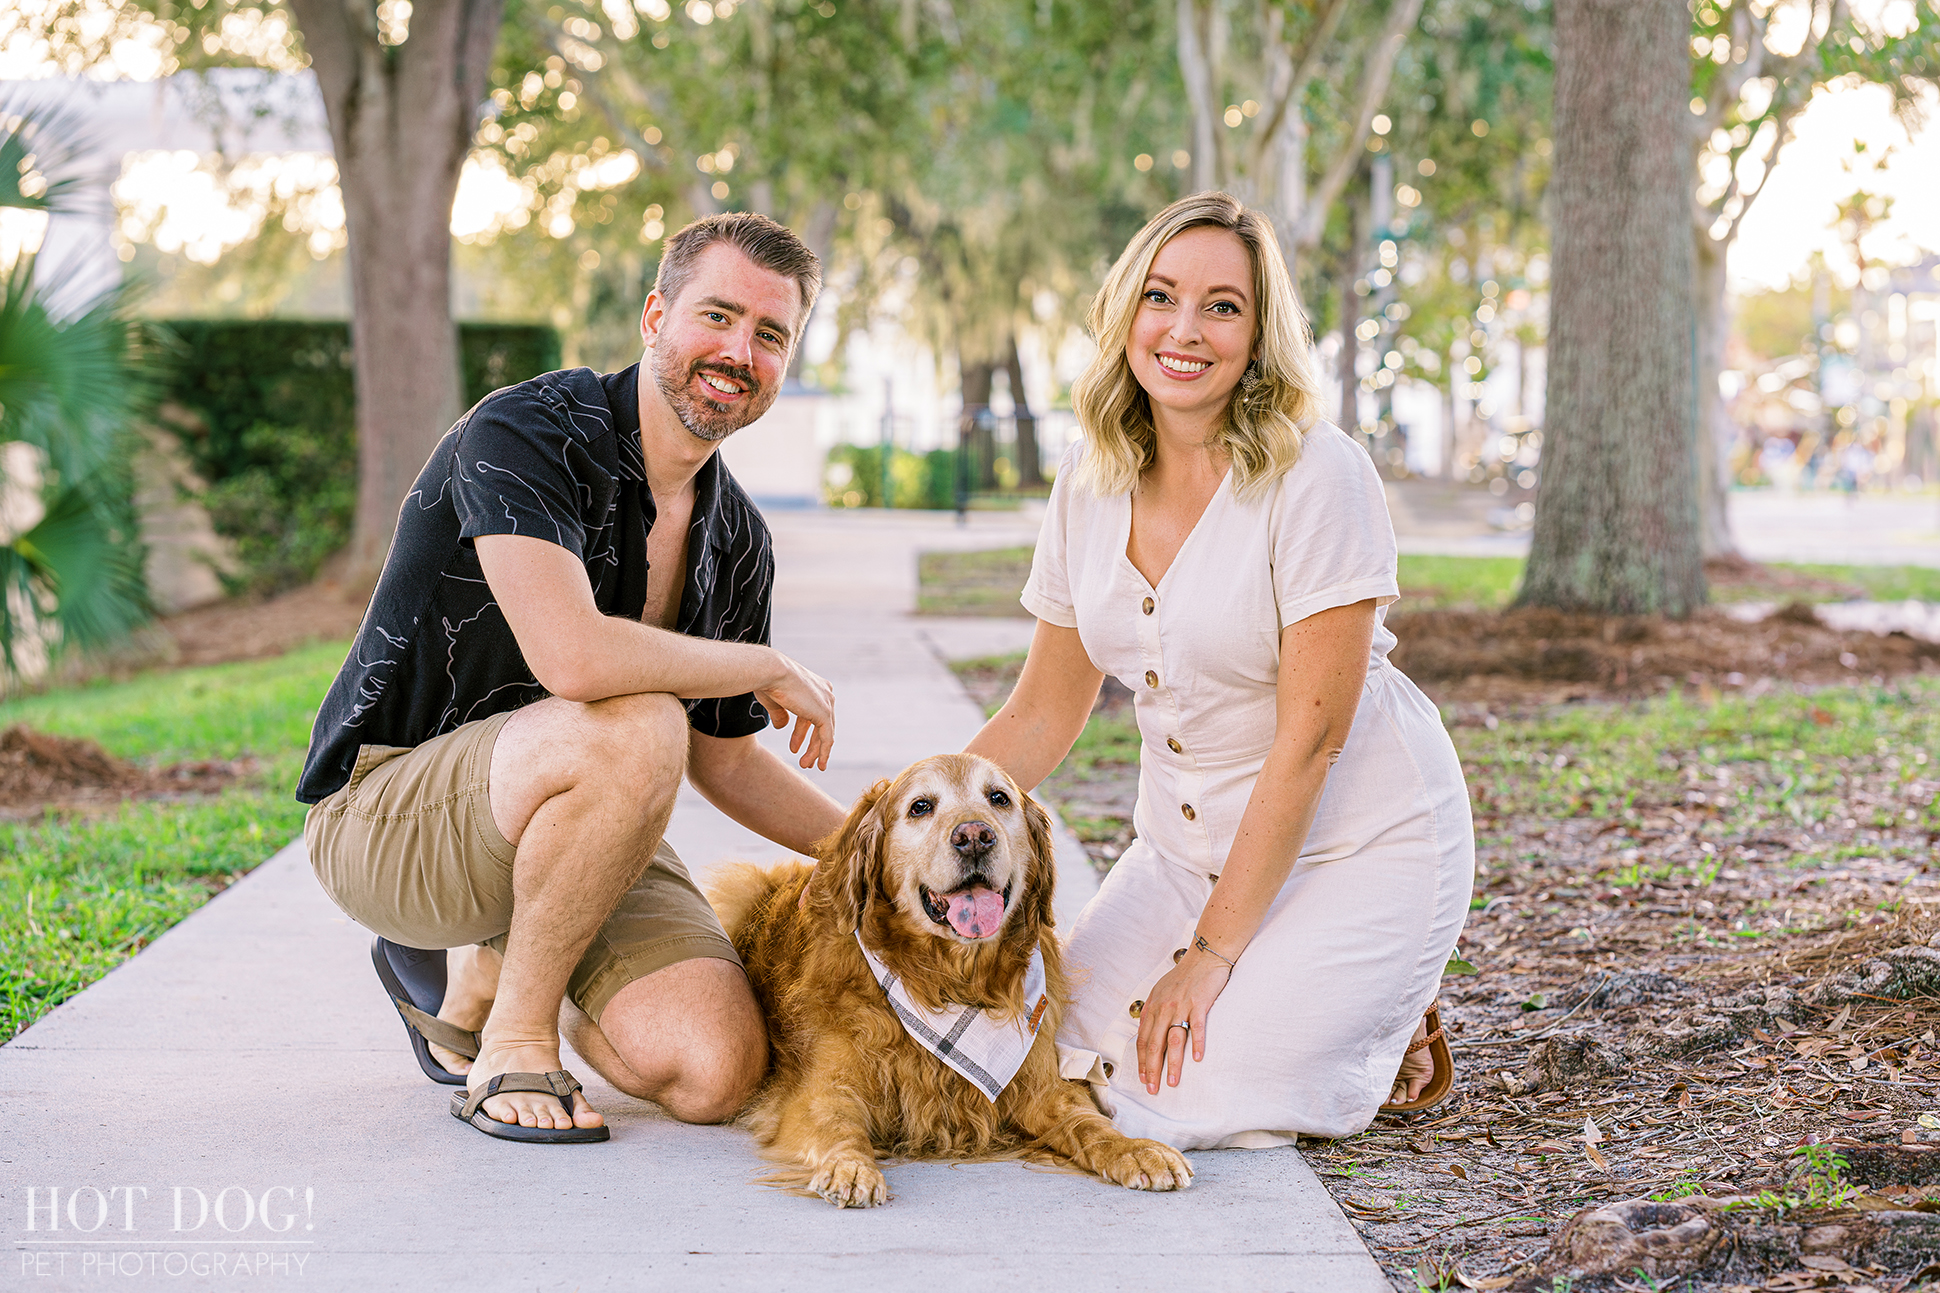 Orlando Pet Photography: Celebrate your furry family members with Hot Dog! Pet Photography, featuring senior golden retriever Osho's heartwarming adventure in Celebration, Florida.